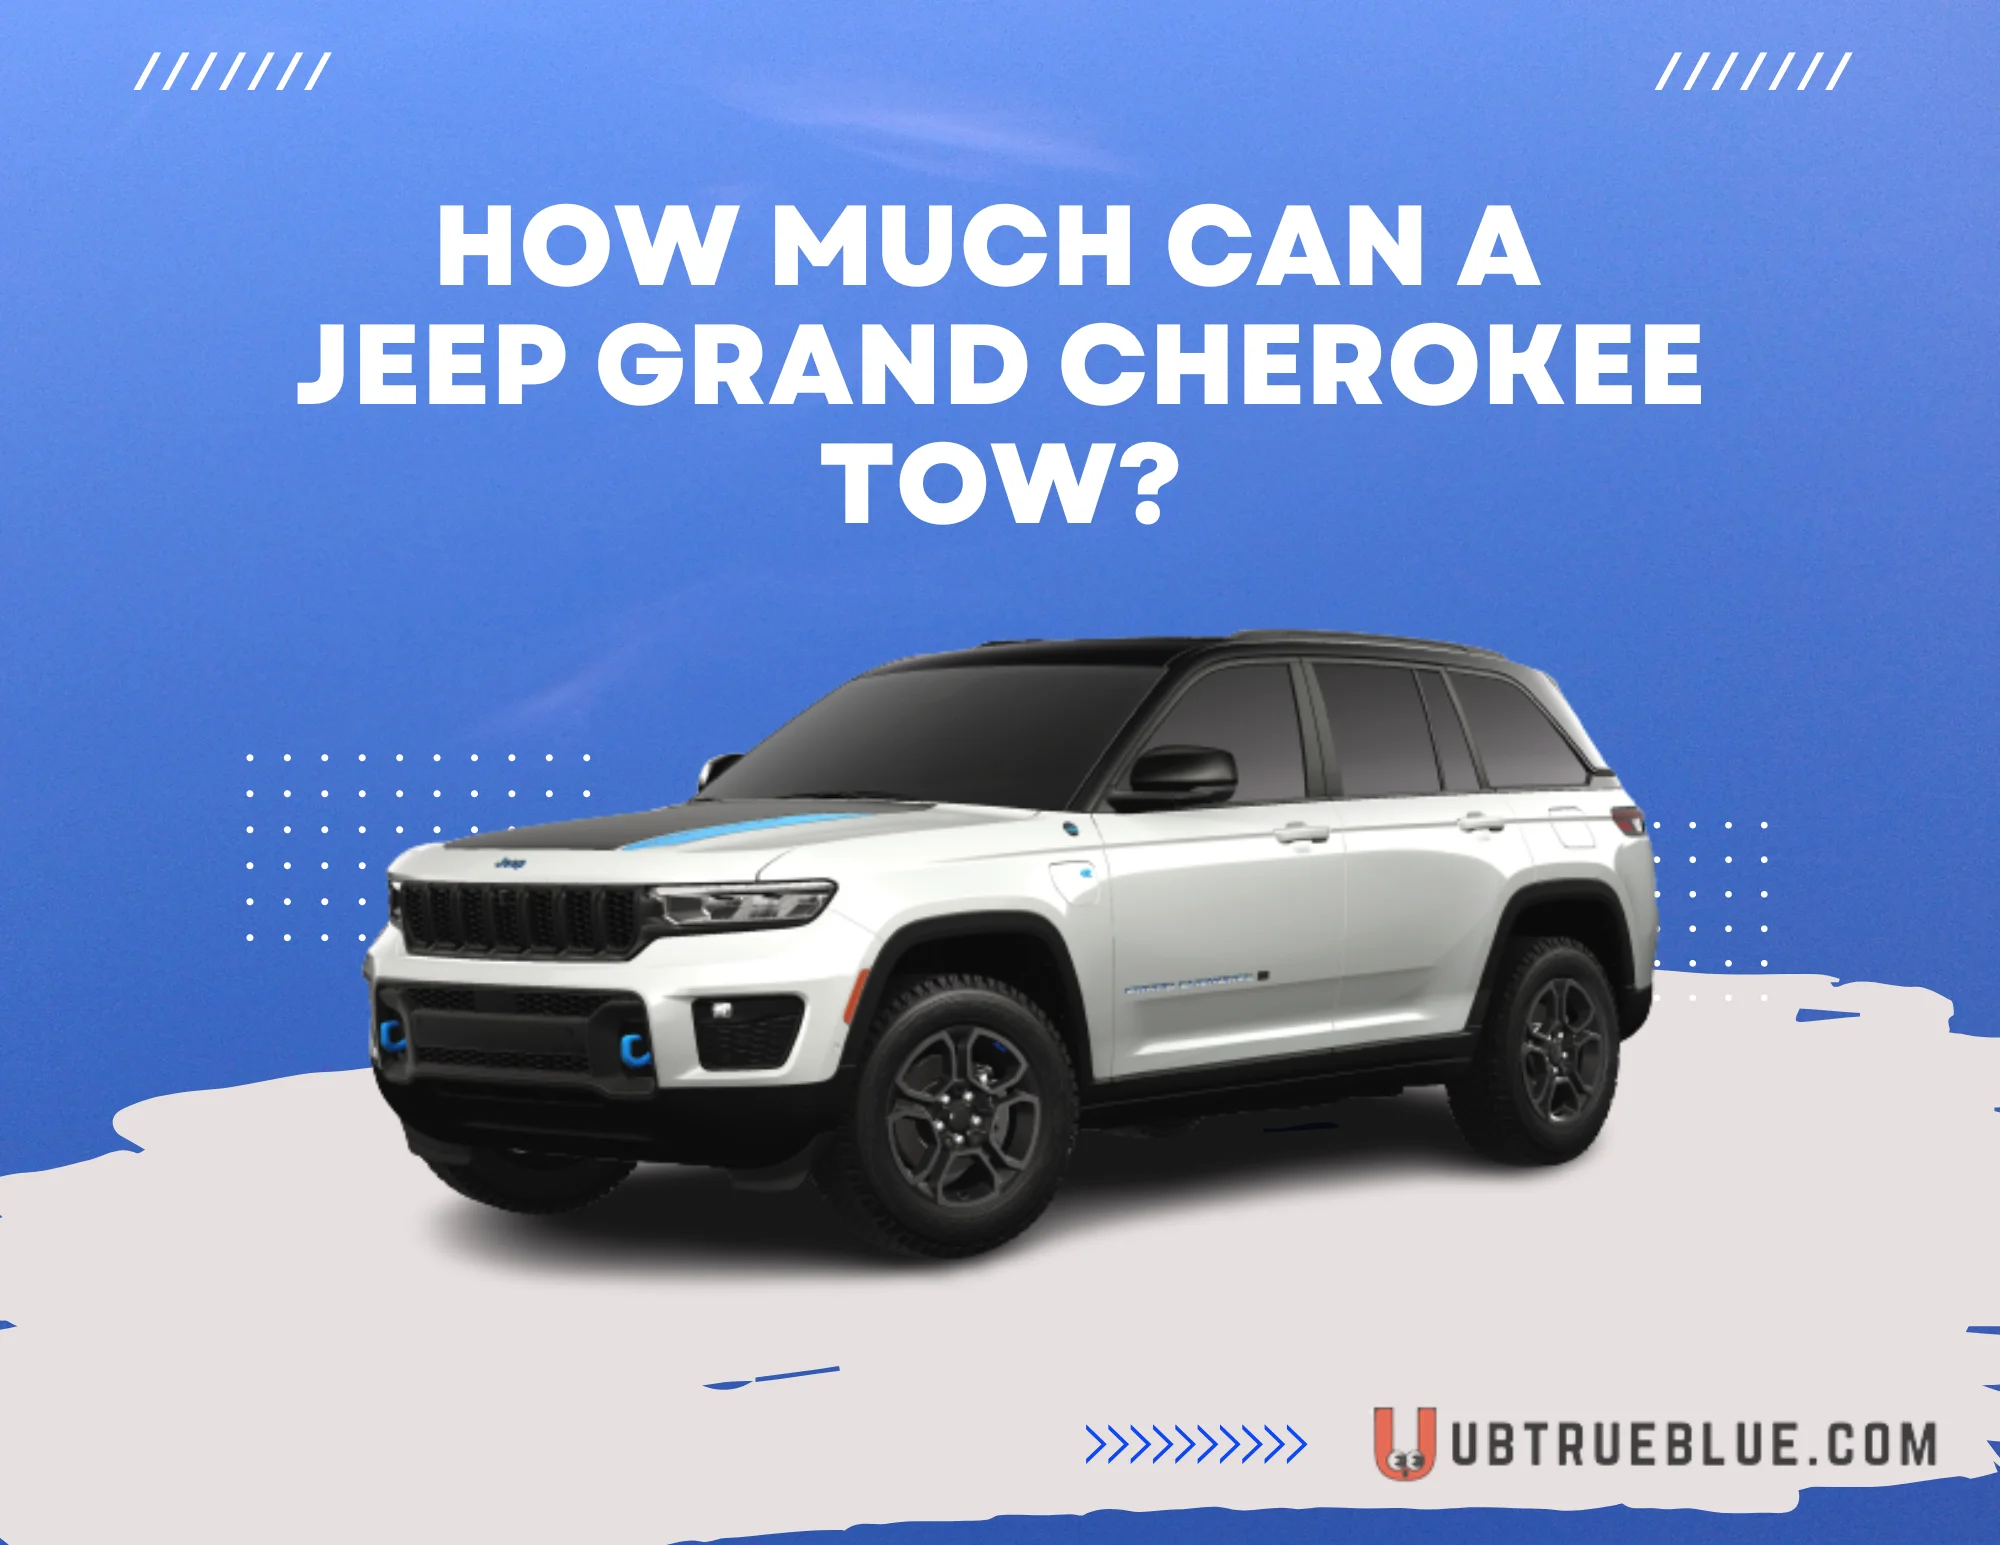 How Much Can A Jeep Grand Cherokee Tow On Ubtrueblue Automotive Tow? Max Tow, Fun Towing Capacity Chart 2023 Review V6  Full